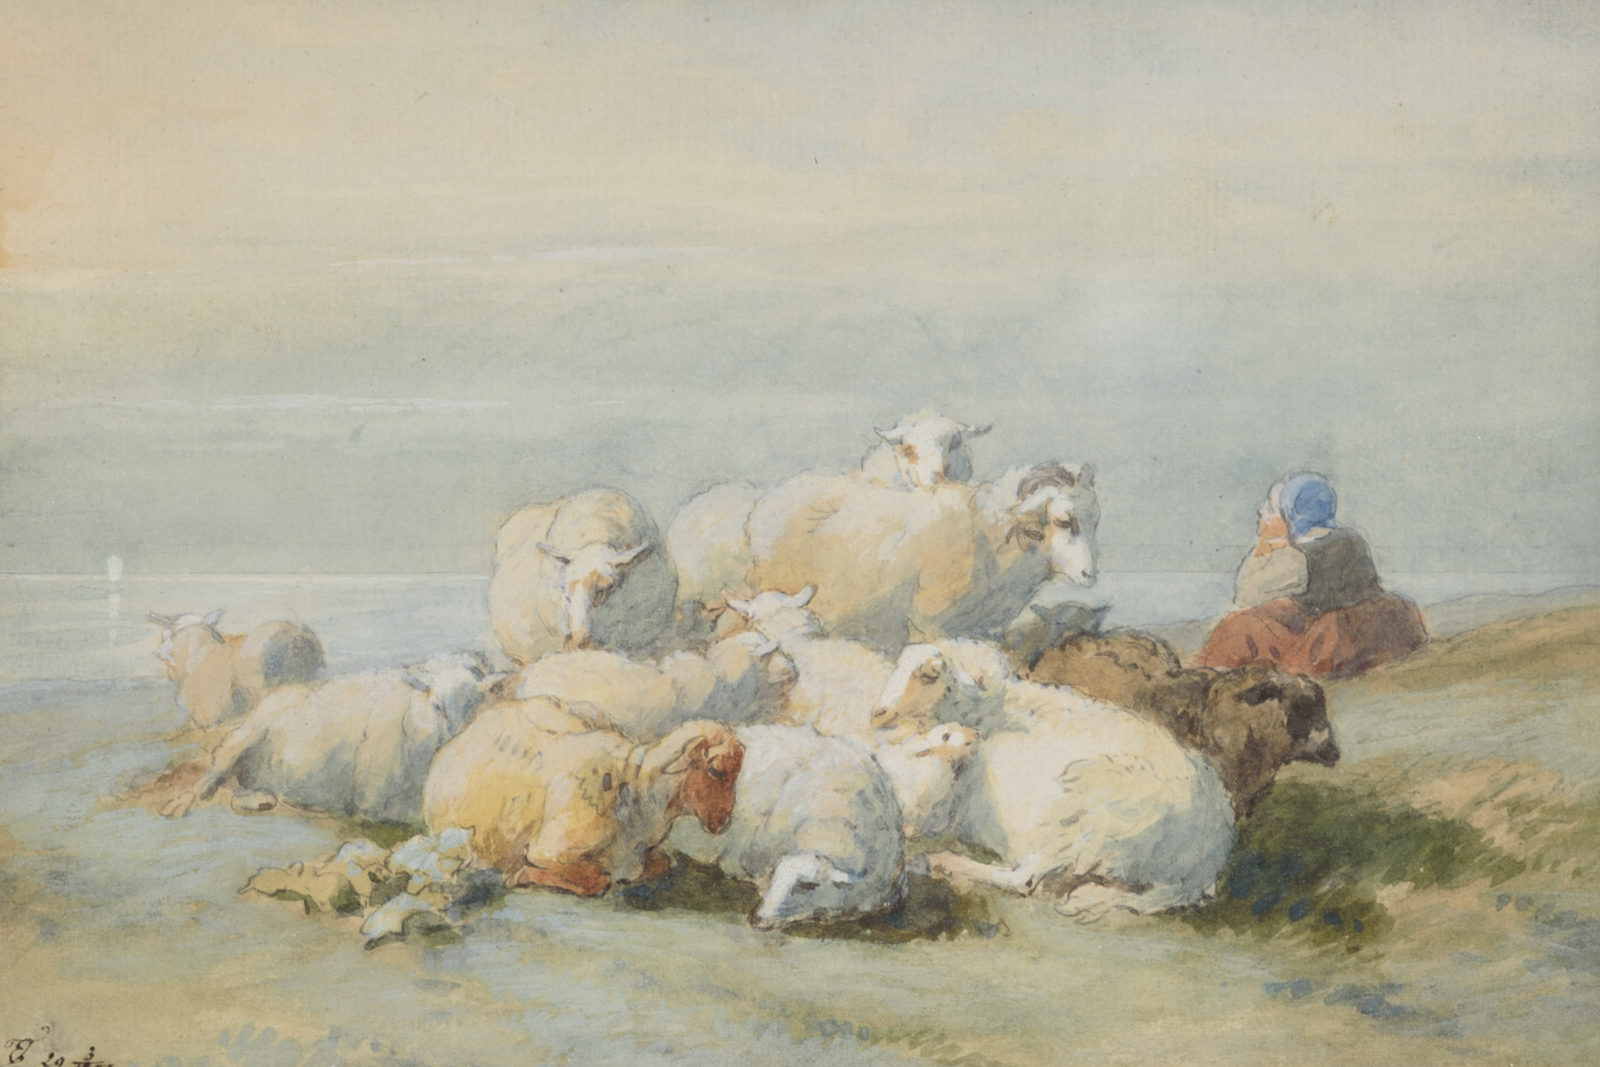 Monogrammed E.T. (Edmond Tschaggeny), a shepherdess with her resting flock of sheep, dated 29.3.1852